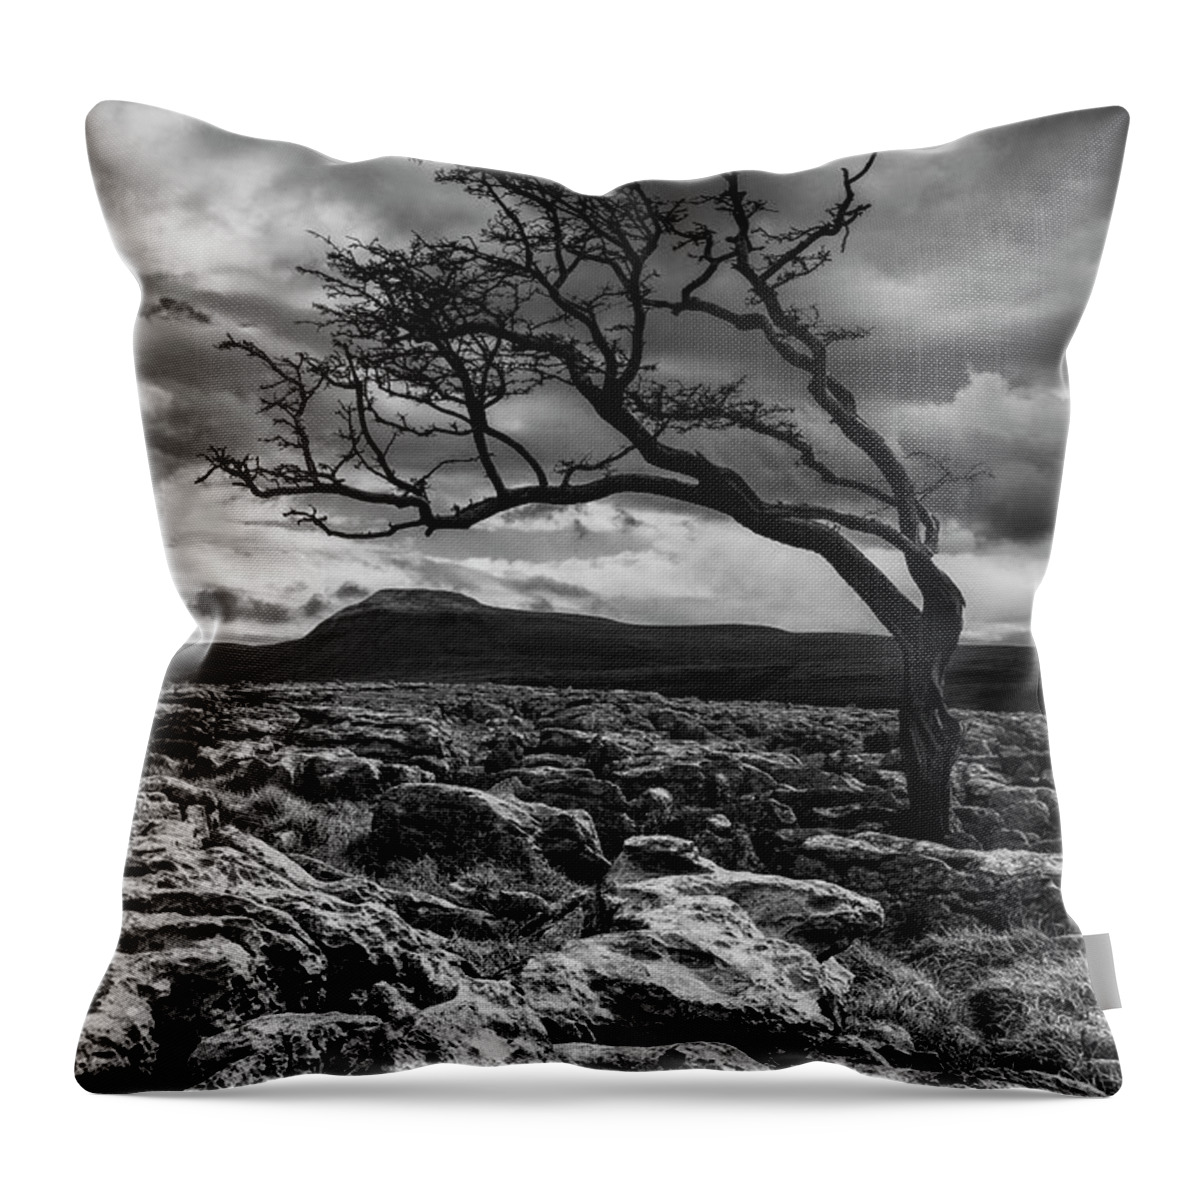 Scenics Throw Pillow featuring the photograph England, North Yorkshire, Twisleton by Jason Friend Photography Ltd